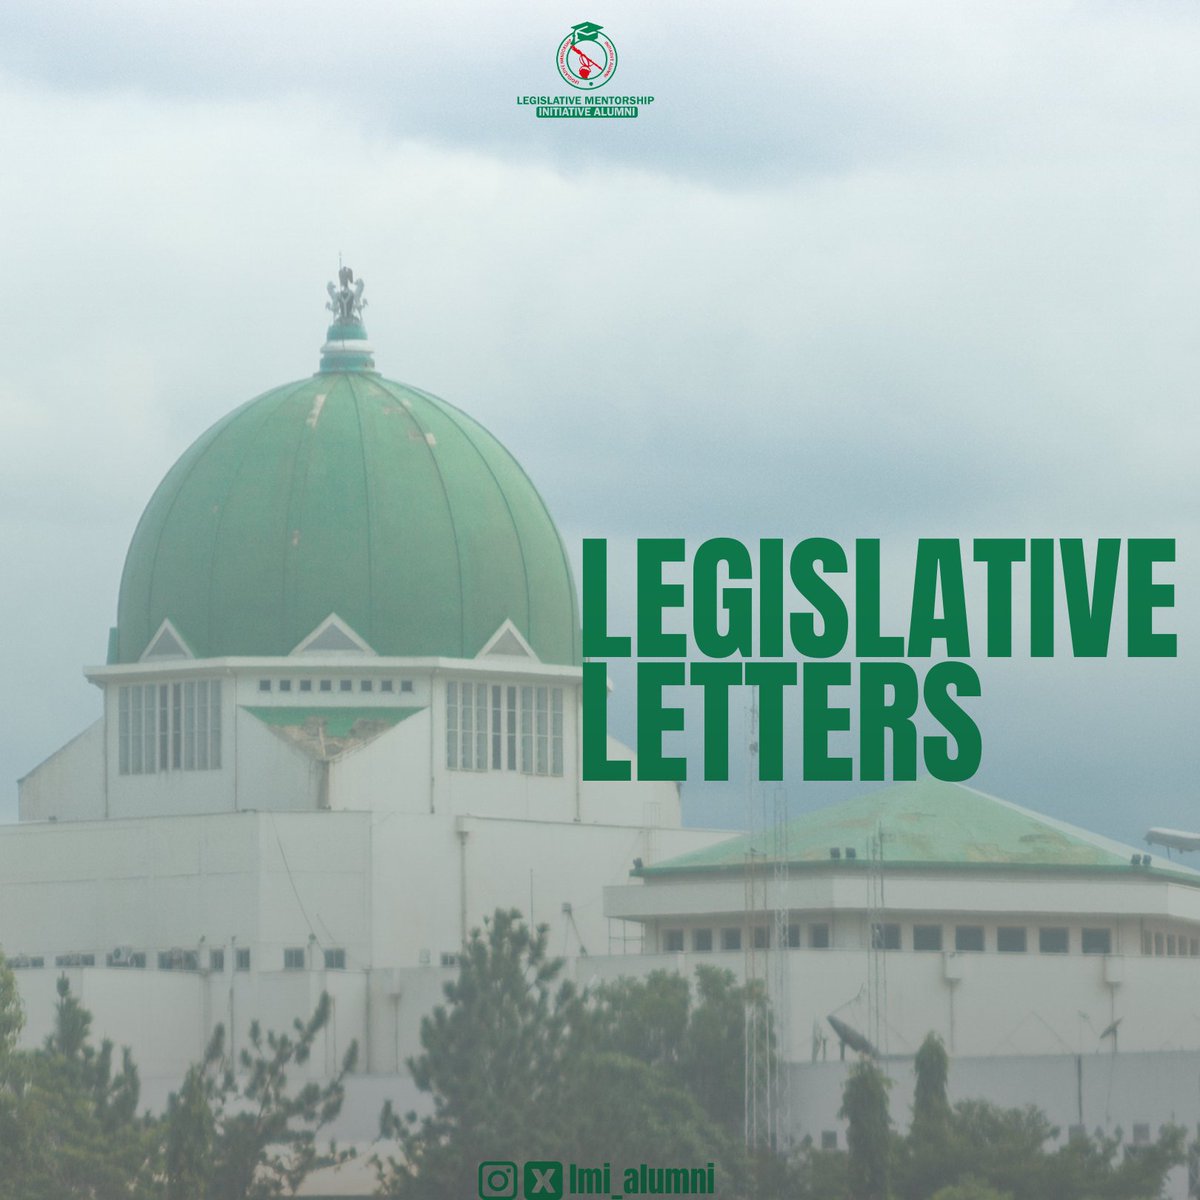 📢LMI Alumni launch 'Legislative Letters'! 📢

Dive deep into national policy issues with insightful analysis from LMI Fellows.

Subscribe for in-depth takes on legislation & expert perspectives: linkedin.com/newsletters/le…

#LMILegislativeLetters #PolicyAnalysis #PublicEducation